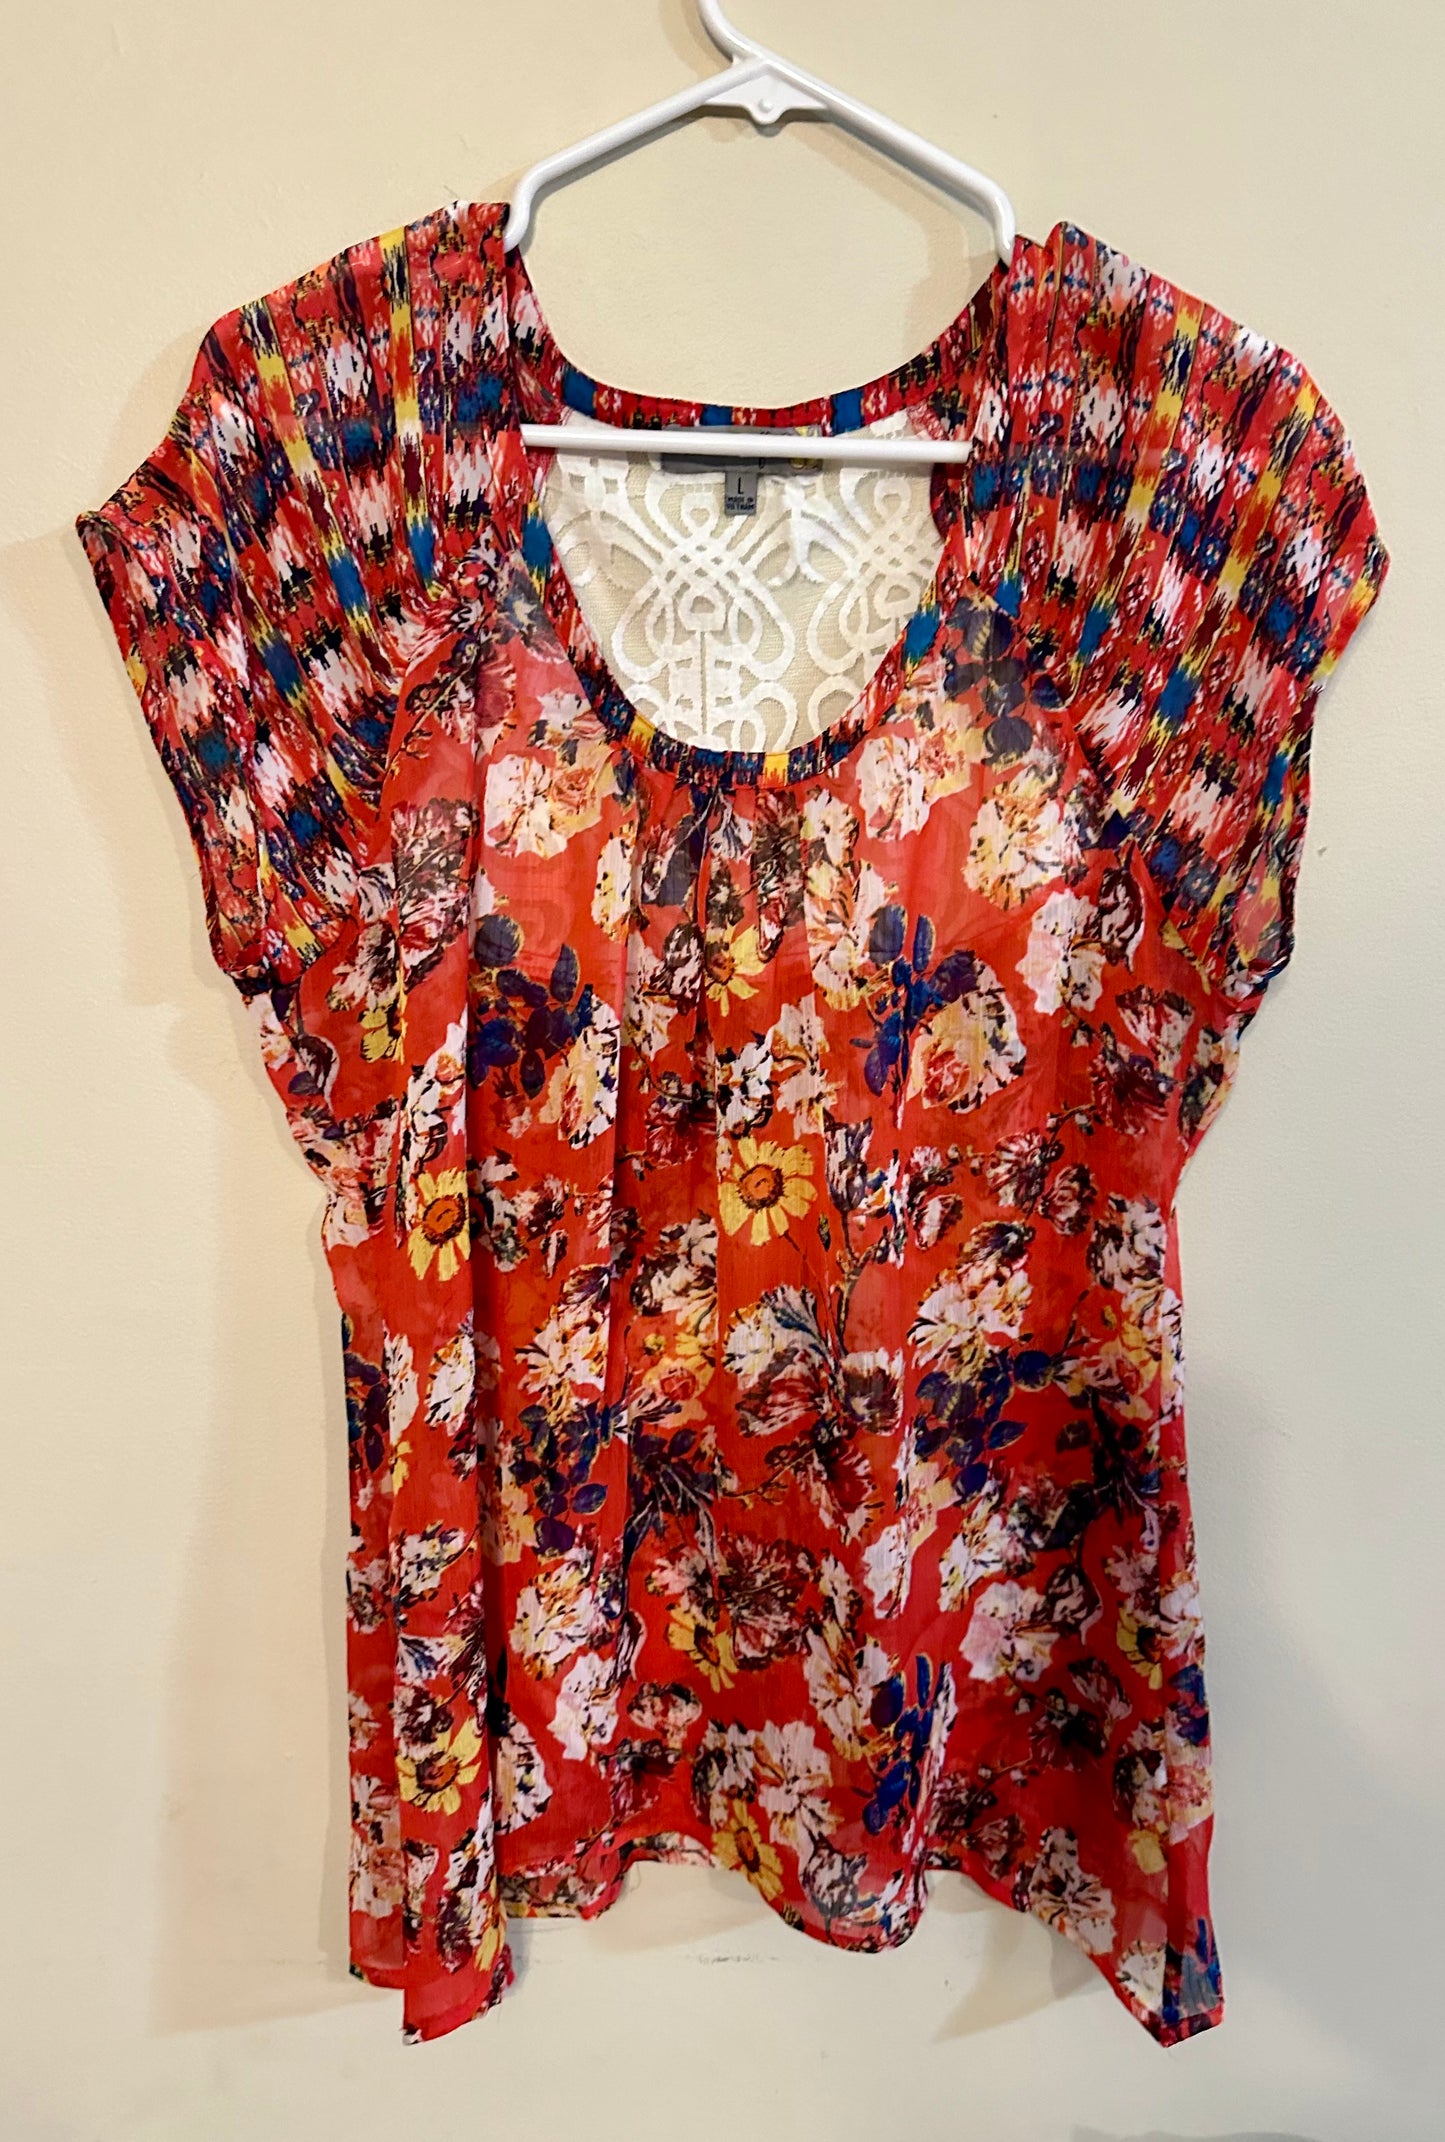 Women's shirt and cami size L